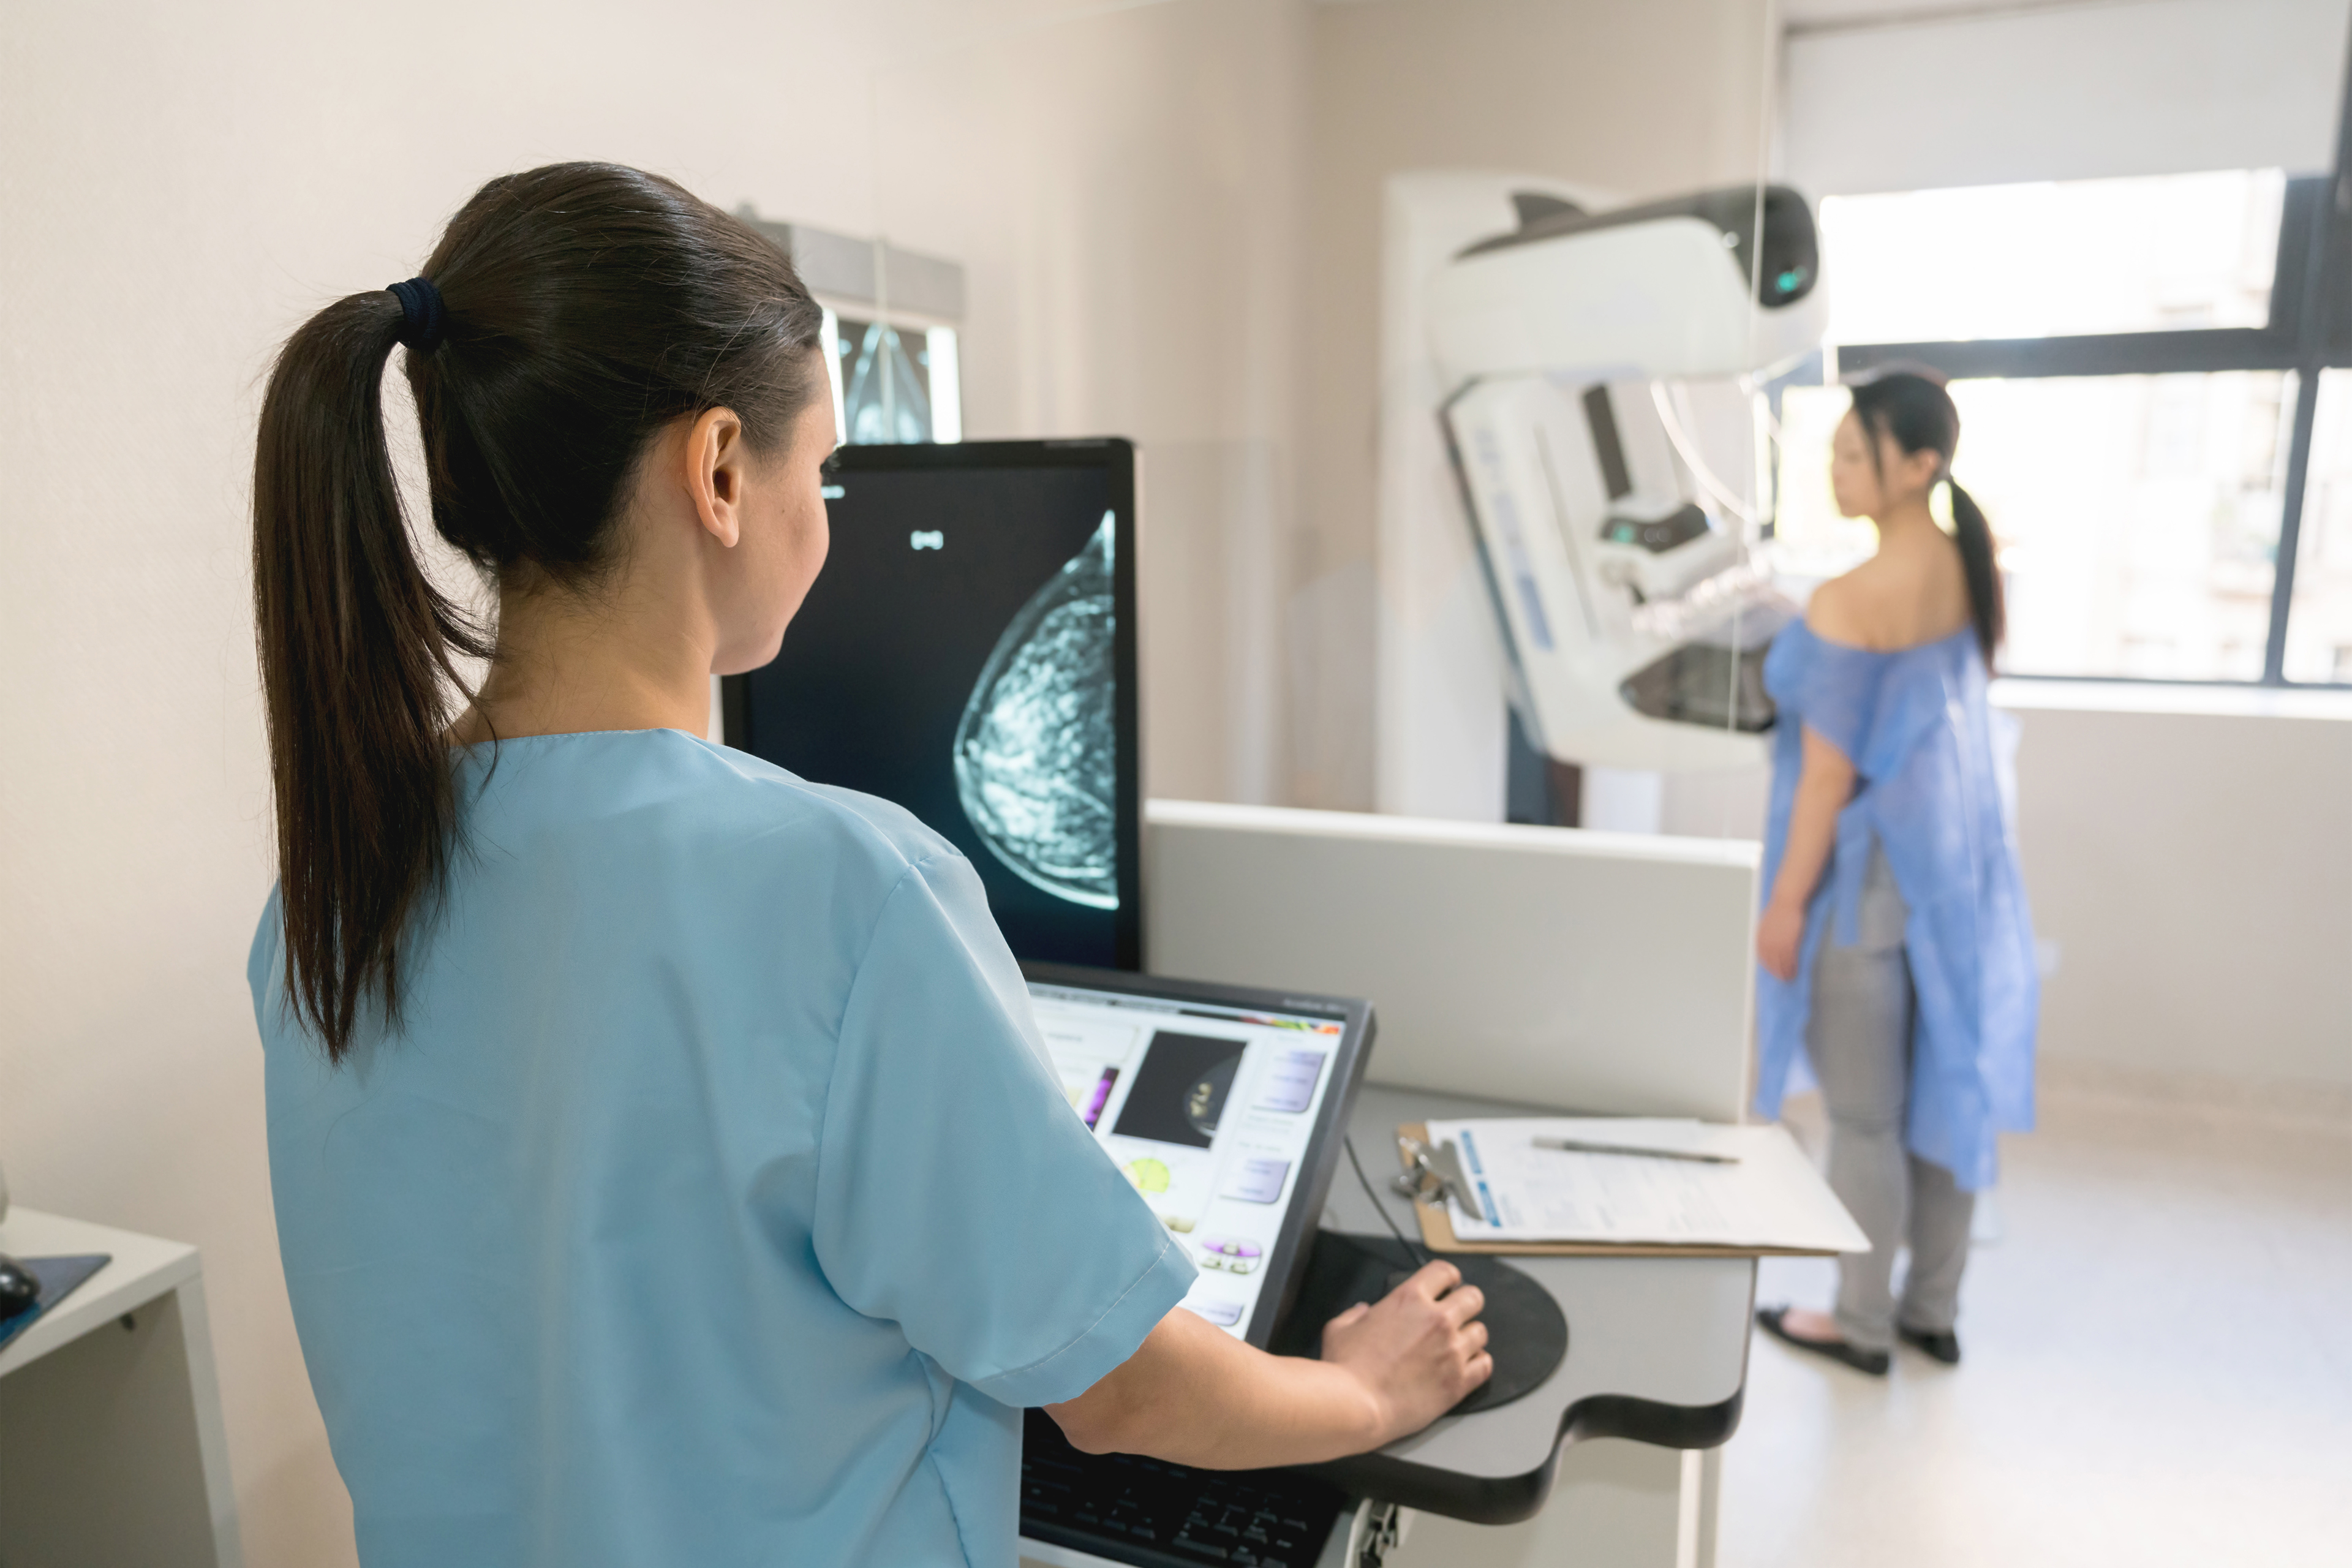 Half of all women experience false positive mammograms after 10 years of  annual screening